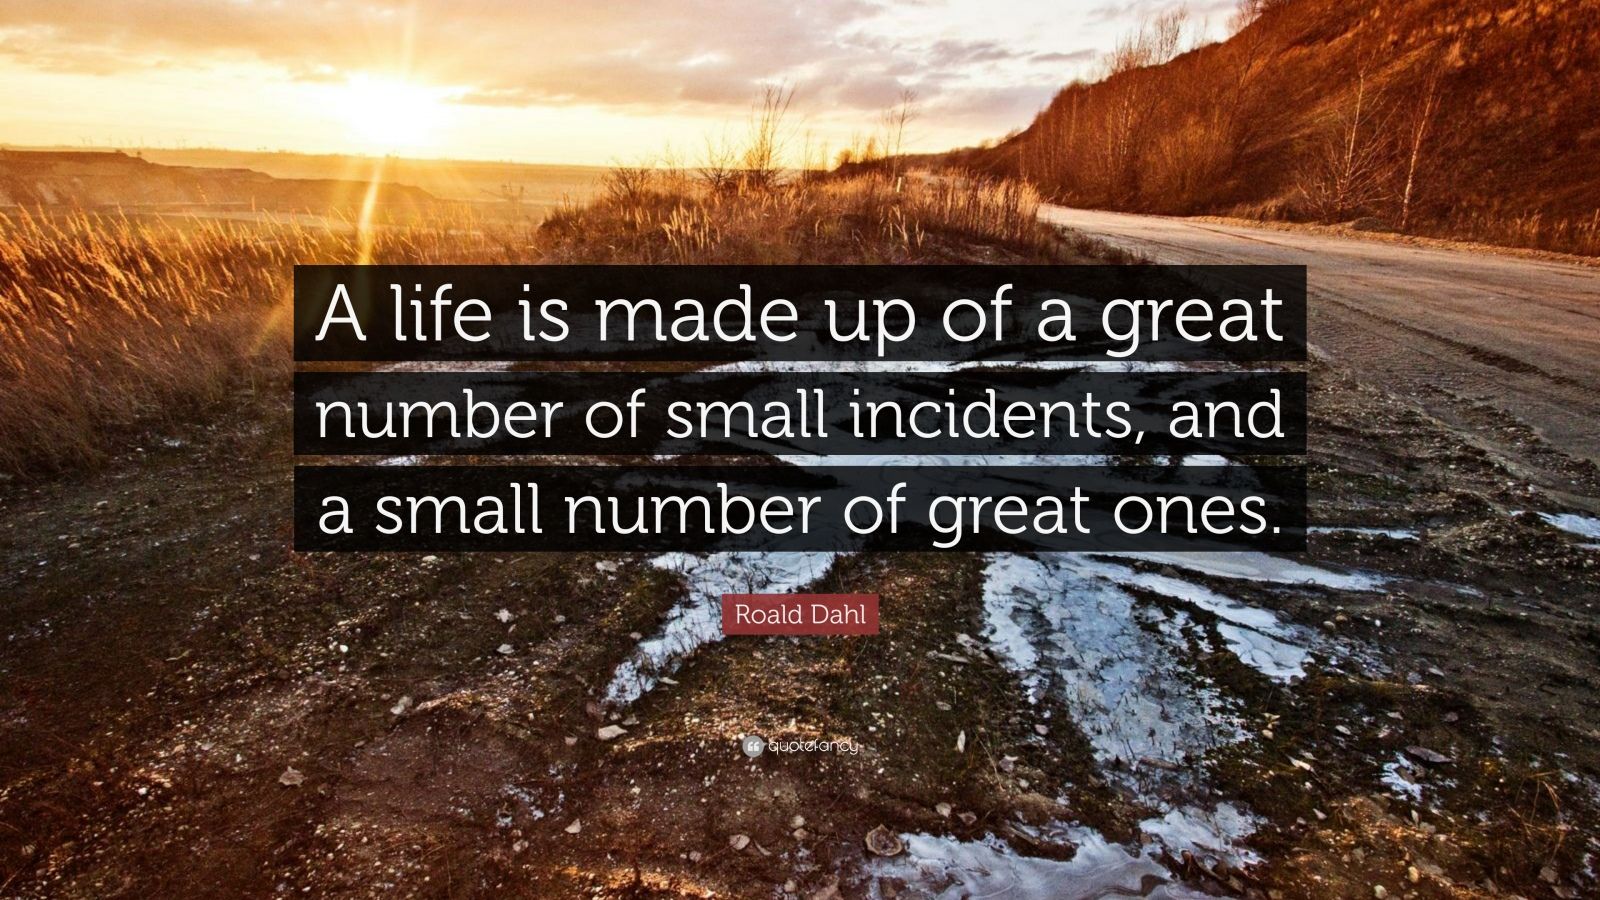 Roald Dahl Quote: “A life is made up of a great number of small ...